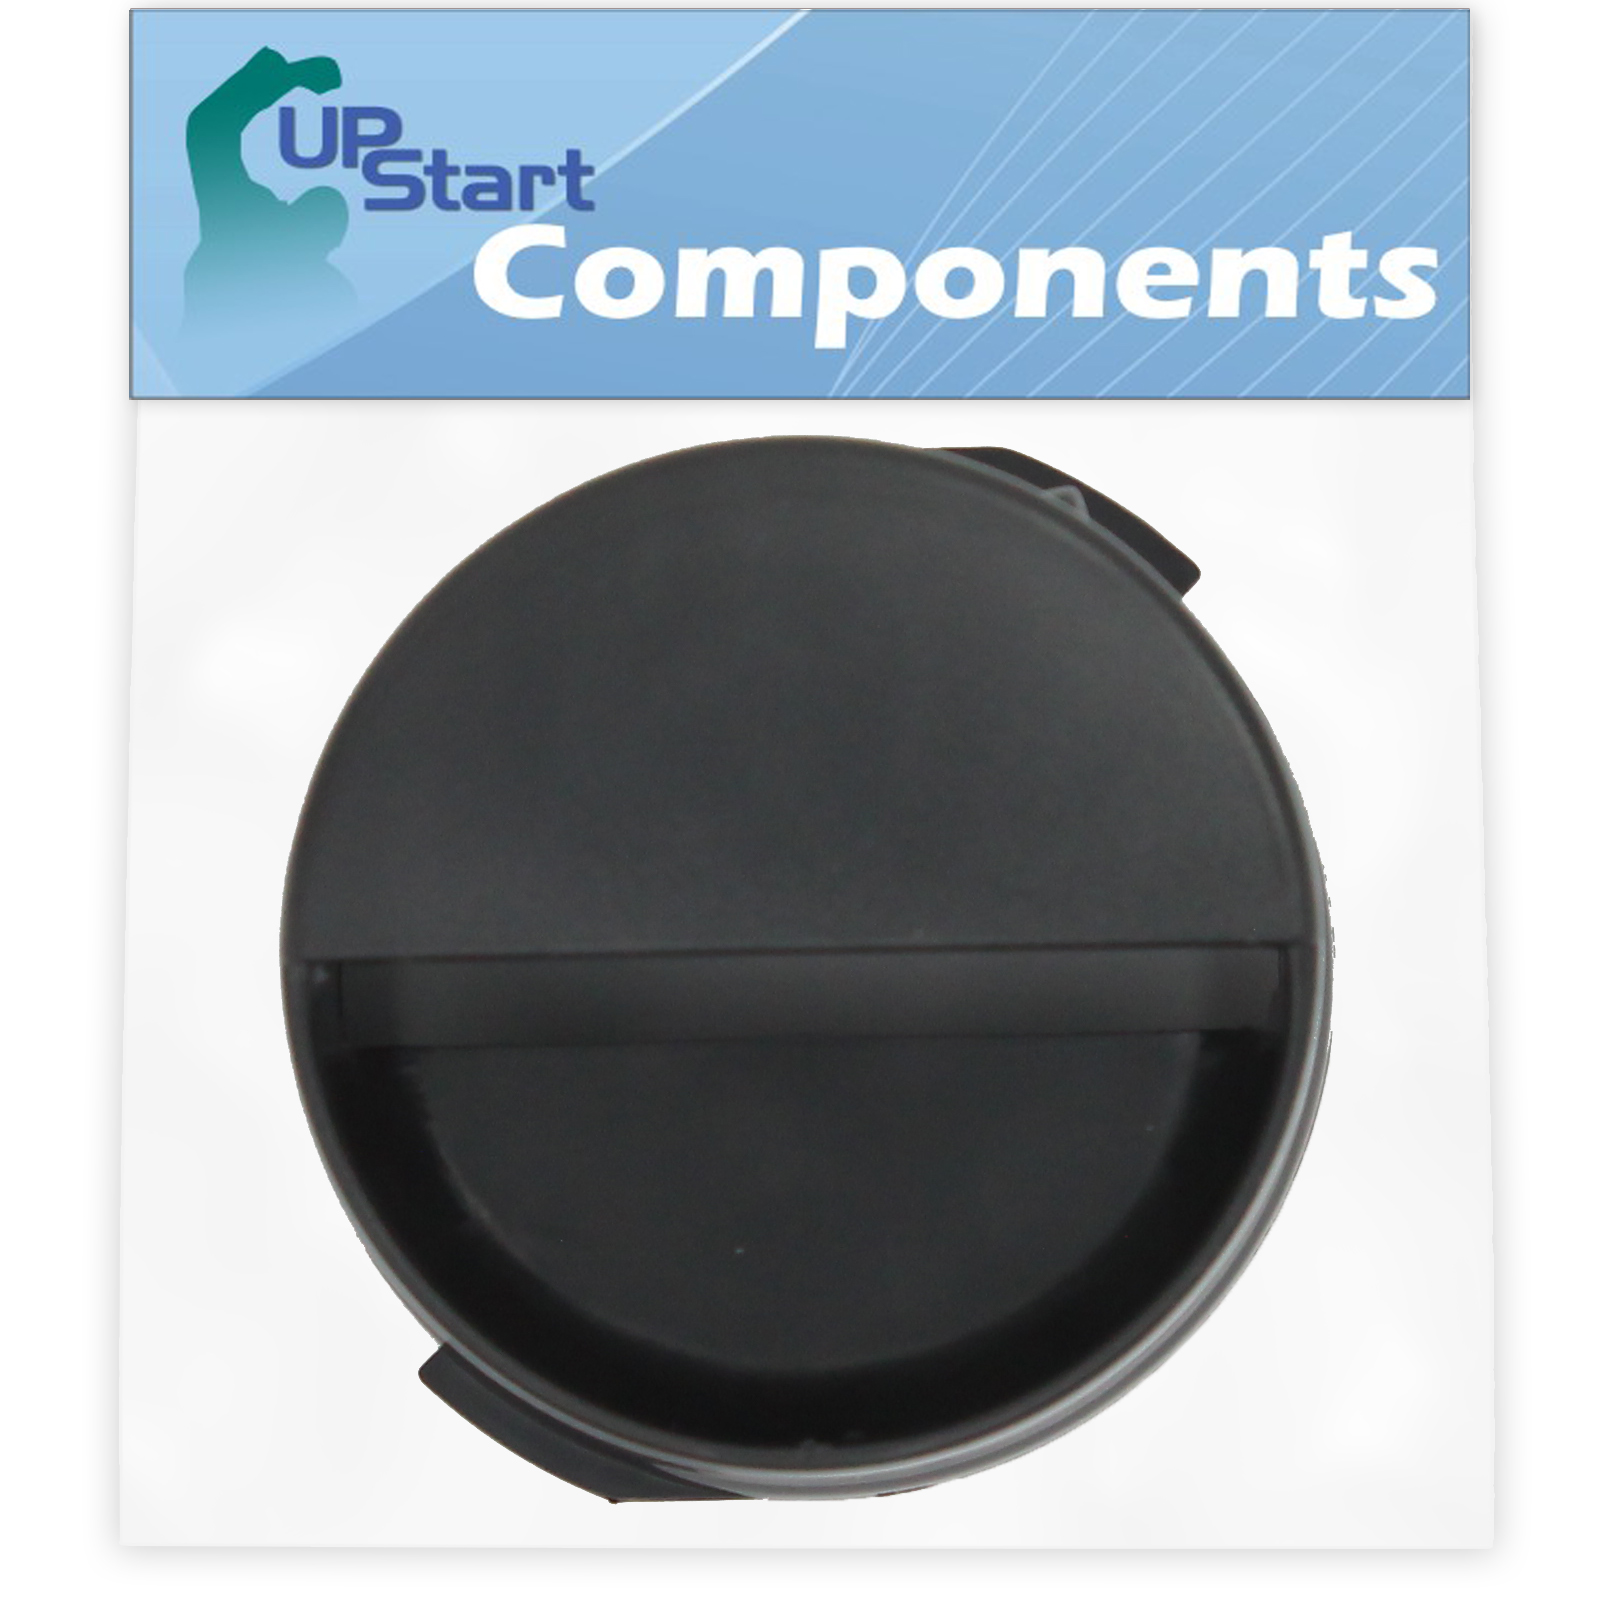 2260502B Refrigerator Water Filter Cap Replacement for Whirlpool ED5HVAXVL01 Refrigerator - Compatible with WP2260518B Black Water Filter Cap - UpStart Components Brand - image 1 of 4